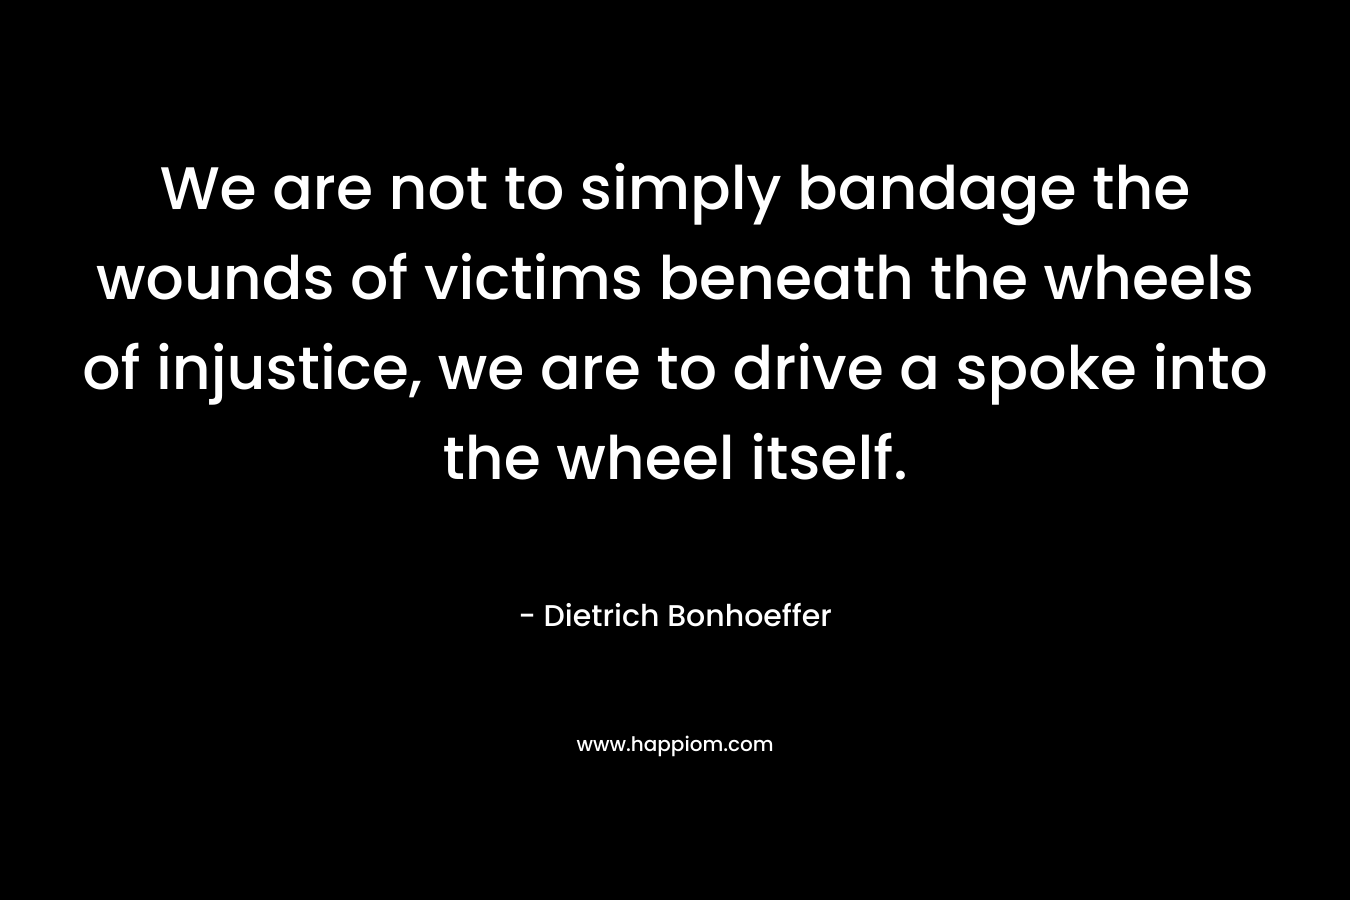 We are not to simply bandage the wounds of victims beneath the wheels of injustice, we are to drive a spoke into the wheel itself. – Dietrich Bonhoeffer